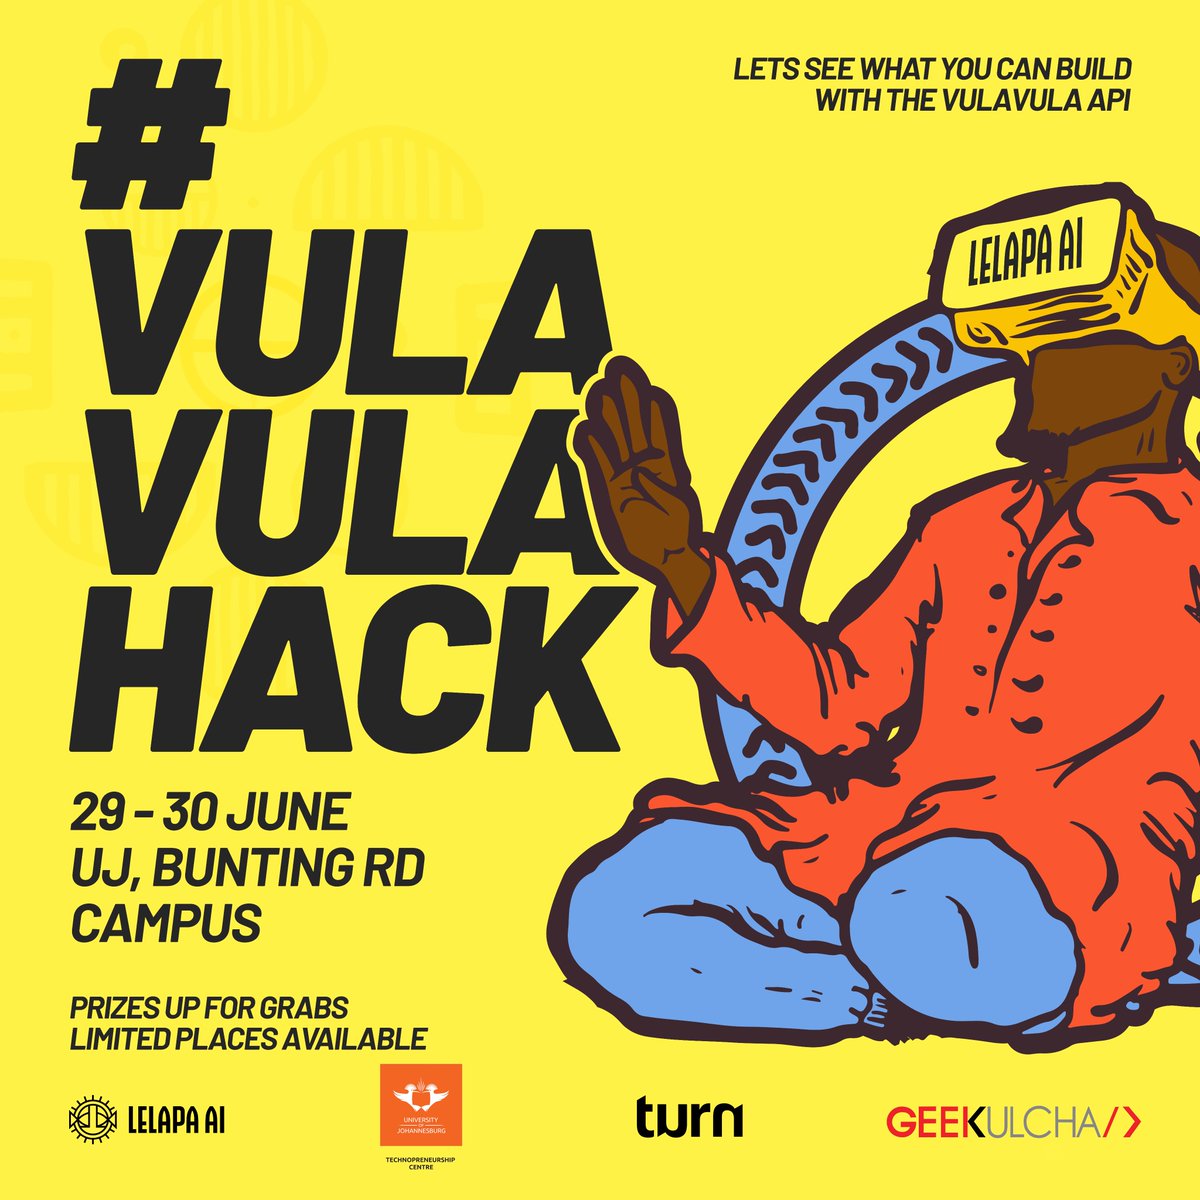 Get ready for the launch of our Vulavula API.🎊 It's multilingual, user-friendly, and proudly African. For now, make sure to apply for our exclusive hackathon to be among the first to explore its features and win prizes! Apply now: bit.ly/VHack #VulavulaHack